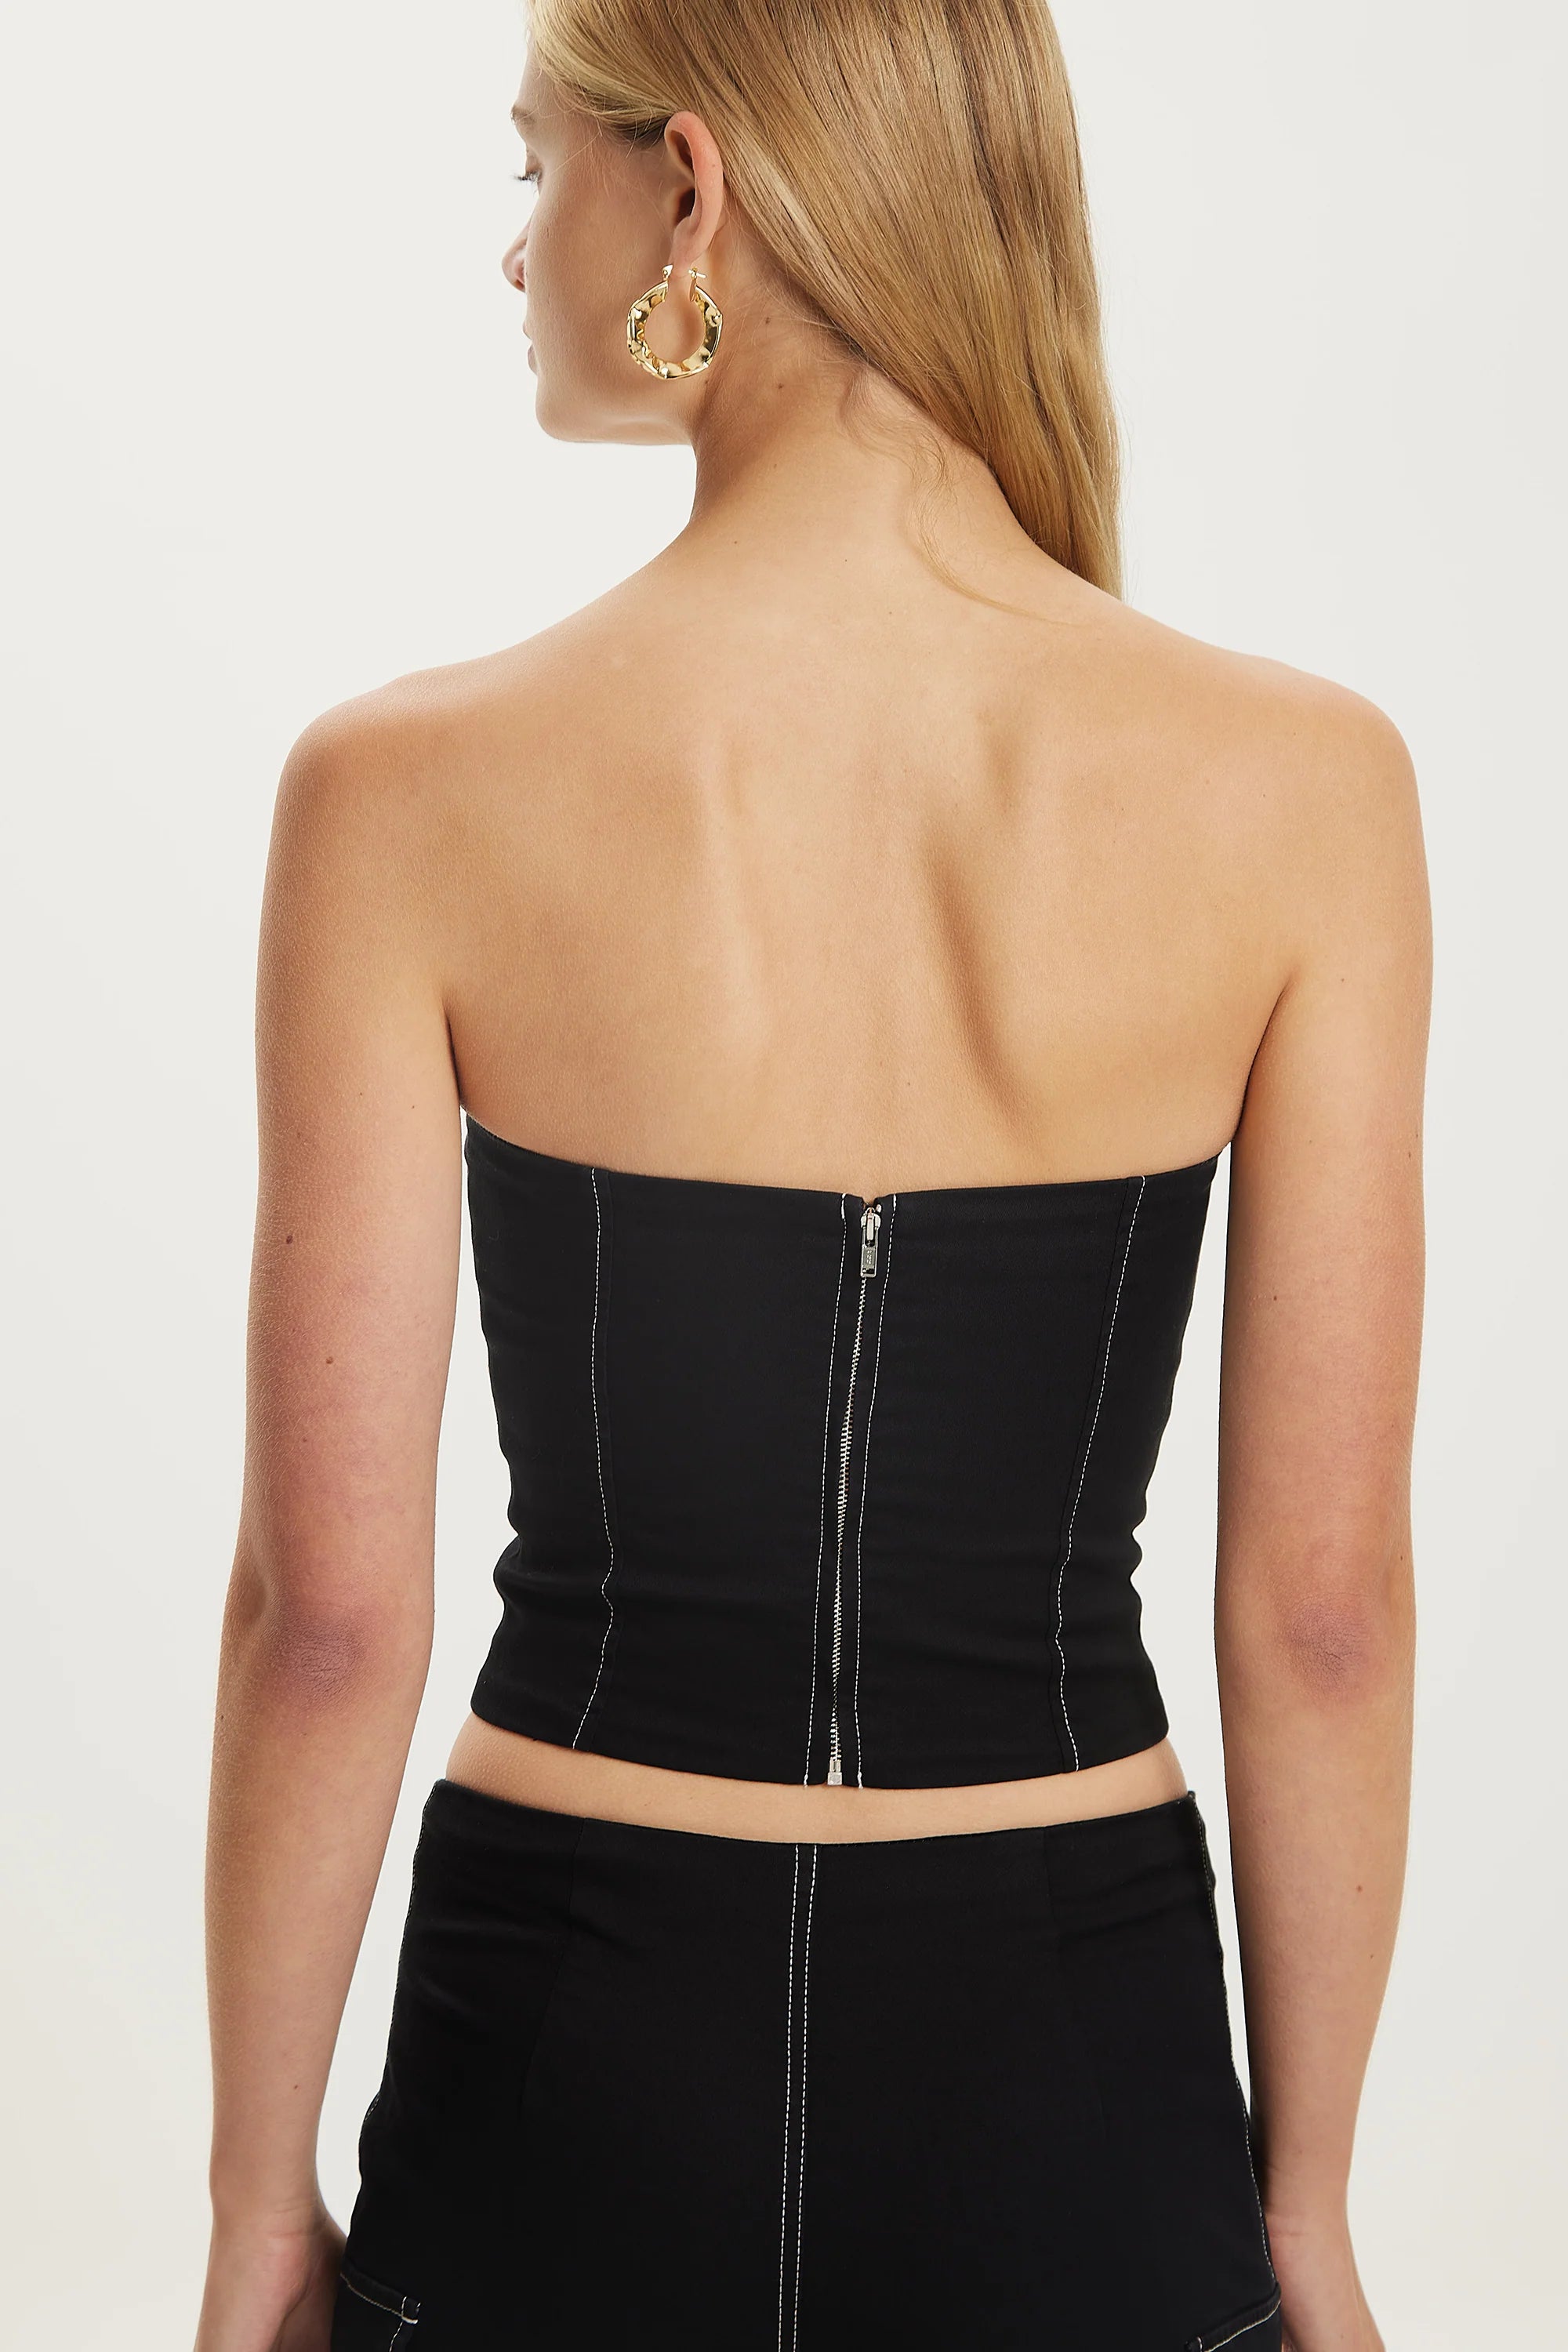 Third Form Open Road Corset Top - Washed Black